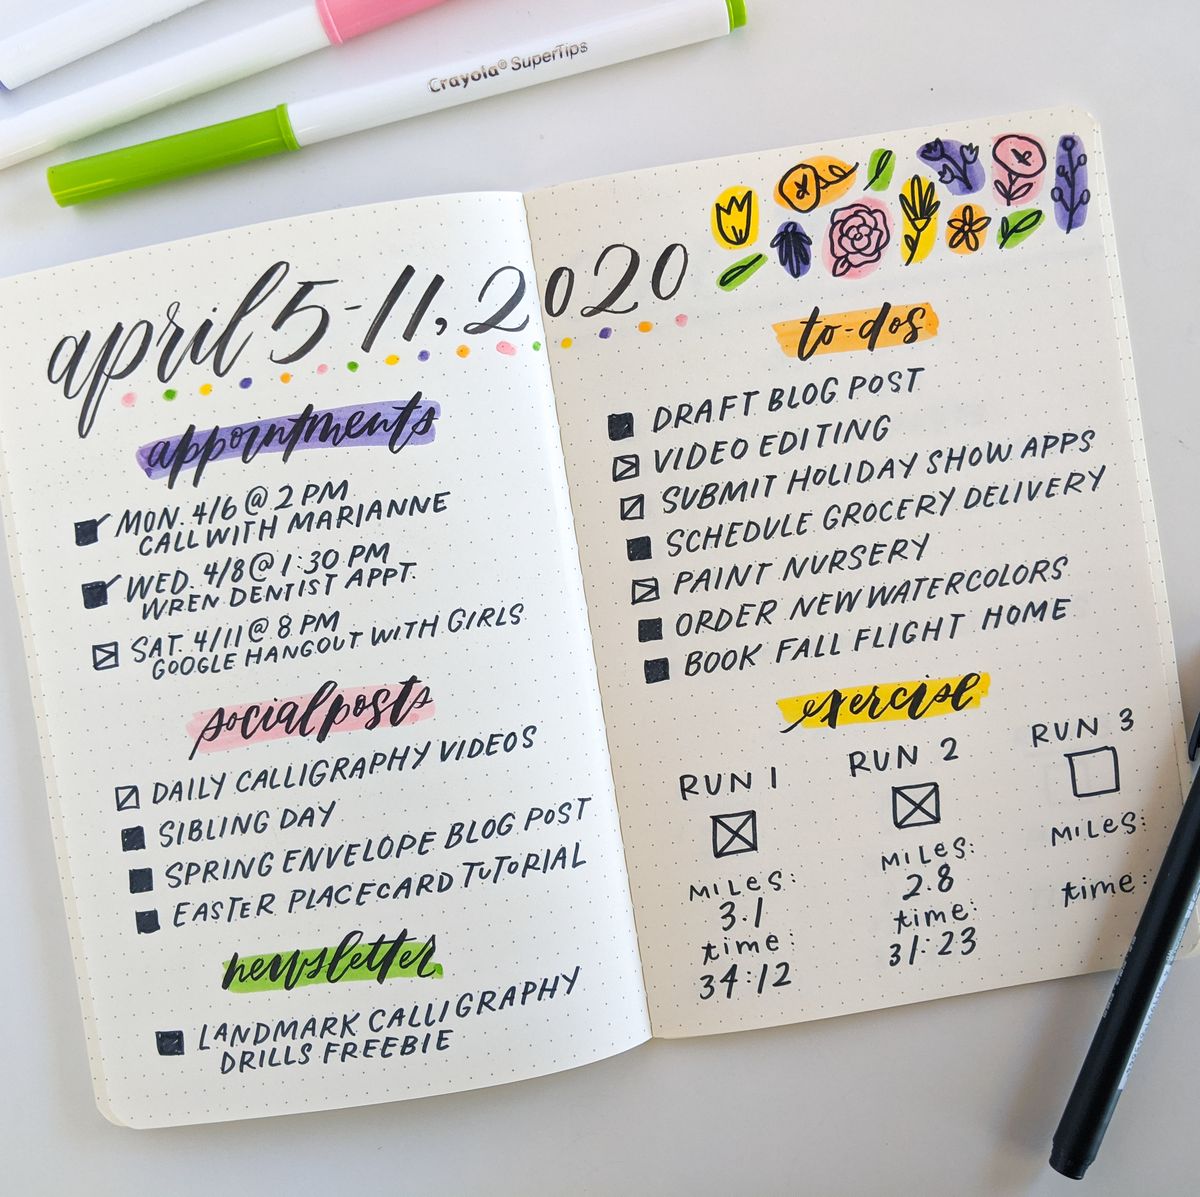 Matron Vergevingsgezind paniek What Is a Bullet Journal? How Beginners Can Get Started